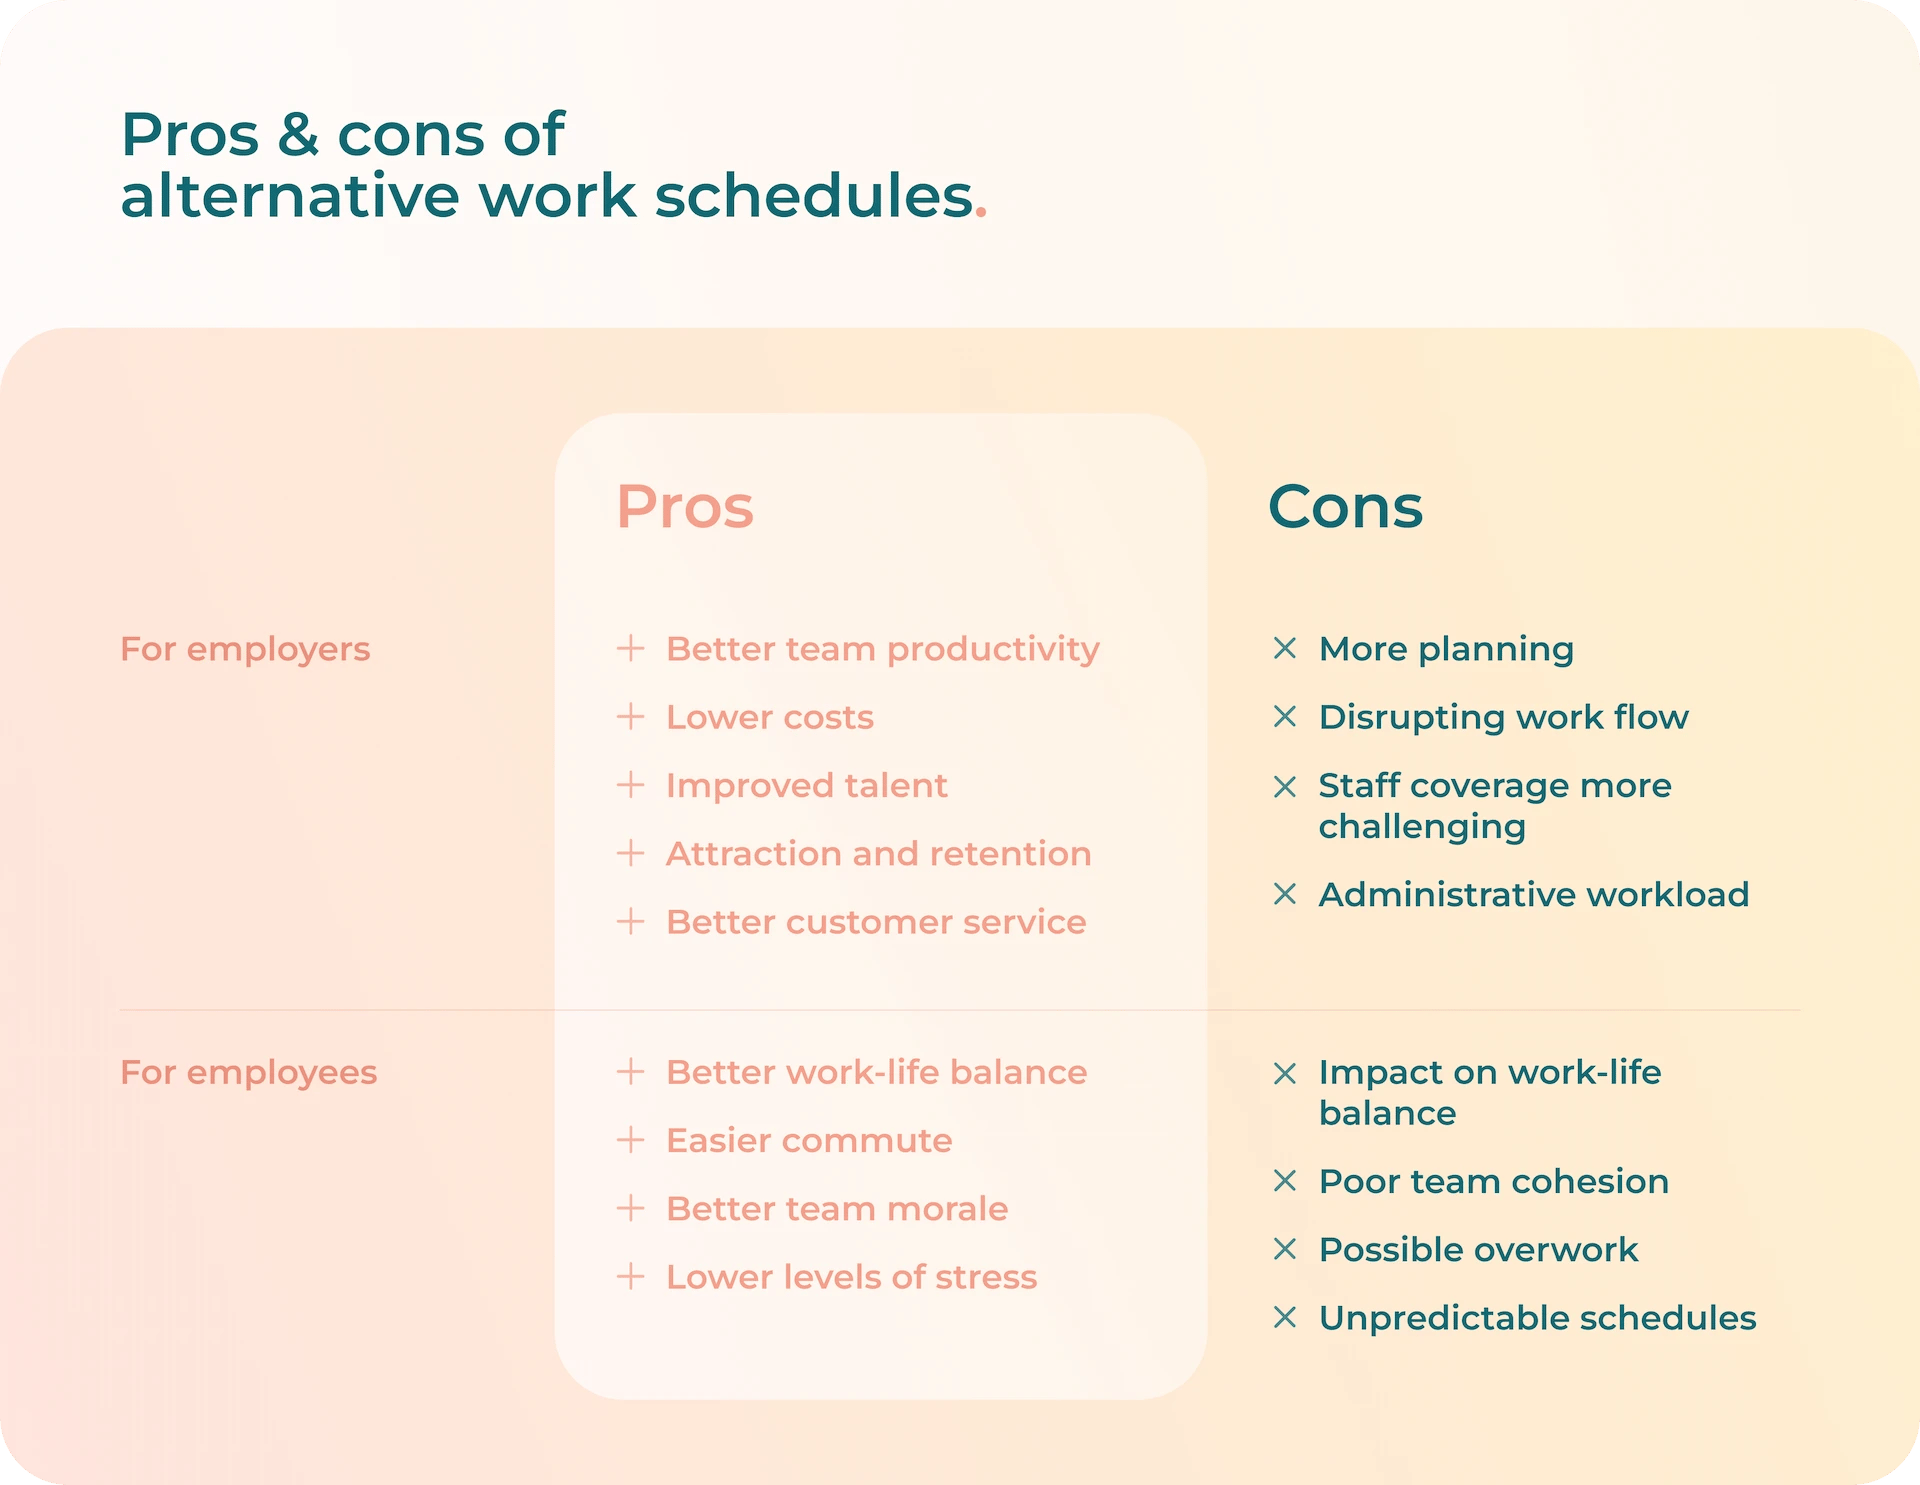 List of pros and cons of alternative work schedule